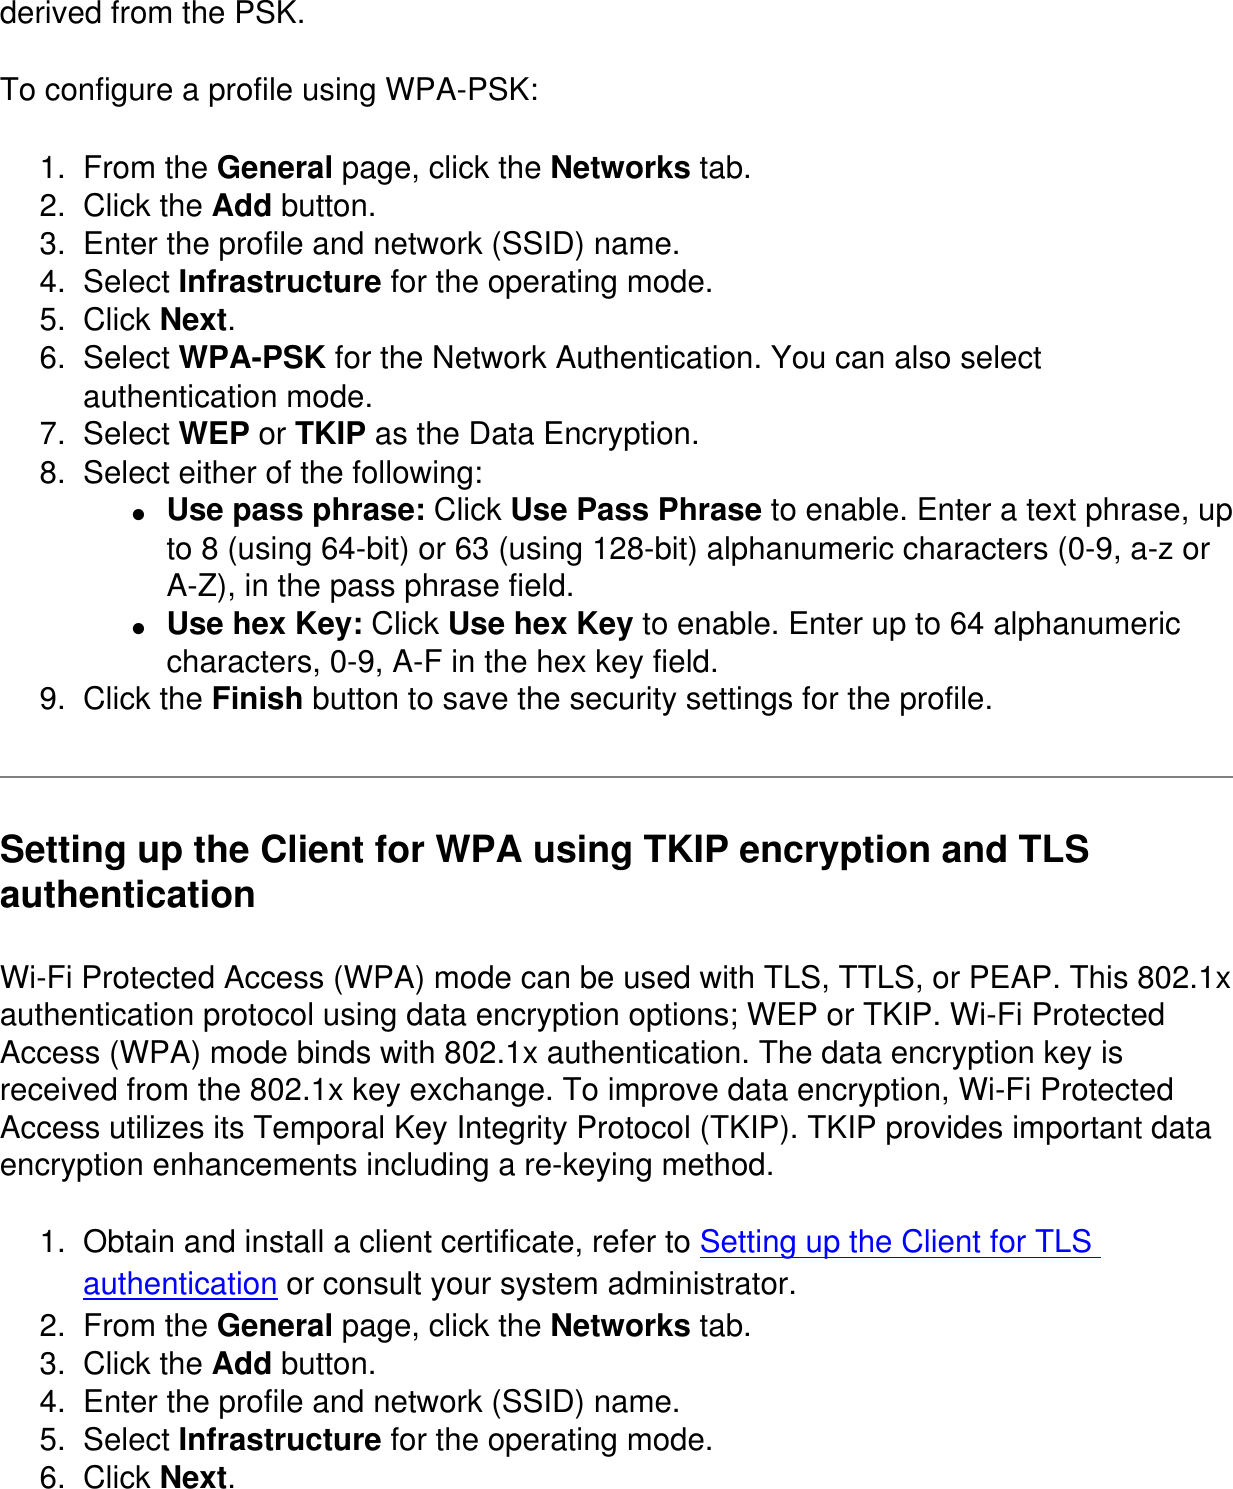 derived from the PSK.To configure a profile using WPA-PSK:1.  From the General page, click the Networks tab. 2.  Click the Add button. 3.  Enter the profile and network (SSID) name. 4.  Select Infrastructure for the operating mode. 5.  Click Next. 6.  Select WPA-PSK for the Network Authentication. You can also select authentication mode. 7.  Select WEP or TKIP as the Data Encryption. 8.  Select either of the following: ●     Use pass phrase: Click Use Pass Phrase to enable. Enter a text phrase, up to 8 (using 64-bit) or 63 (using 128-bit) alphanumeric characters (0-9, a-z or A-Z), in the pass phrase field.●     Use hex Key: Click Use hex Key to enable. Enter up to 64 alphanumeric characters, 0-9, A-F in the hex key field. 9.  Click the Finish button to save the security settings for the profile. Setting up the Client for WPA using TKIP encryption and TLS authenticationWi-Fi Protected Access (WPA) mode can be used with TLS, TTLS, or PEAP. This 802.1x authentication protocol using data encryption options; WEP or TKIP. Wi-Fi Protected Access (WPA) mode binds with 802.1x authentication. The data encryption key is received from the 802.1x key exchange. To improve data encryption, Wi-Fi Protected Access utilizes its Temporal Key Integrity Protocol (TKIP). TKIP provides important data encryption enhancements including a re-keying method. 1.  Obtain and install a client certificate, refer to Setting up the Client for TLS authentication or consult your system administrator. 2.  From the General page, click the Networks tab. 3.  Click the Add button. 4.  Enter the profile and network (SSID) name. 5.  Select Infrastructure for the operating mode. 6.  Click Next. 